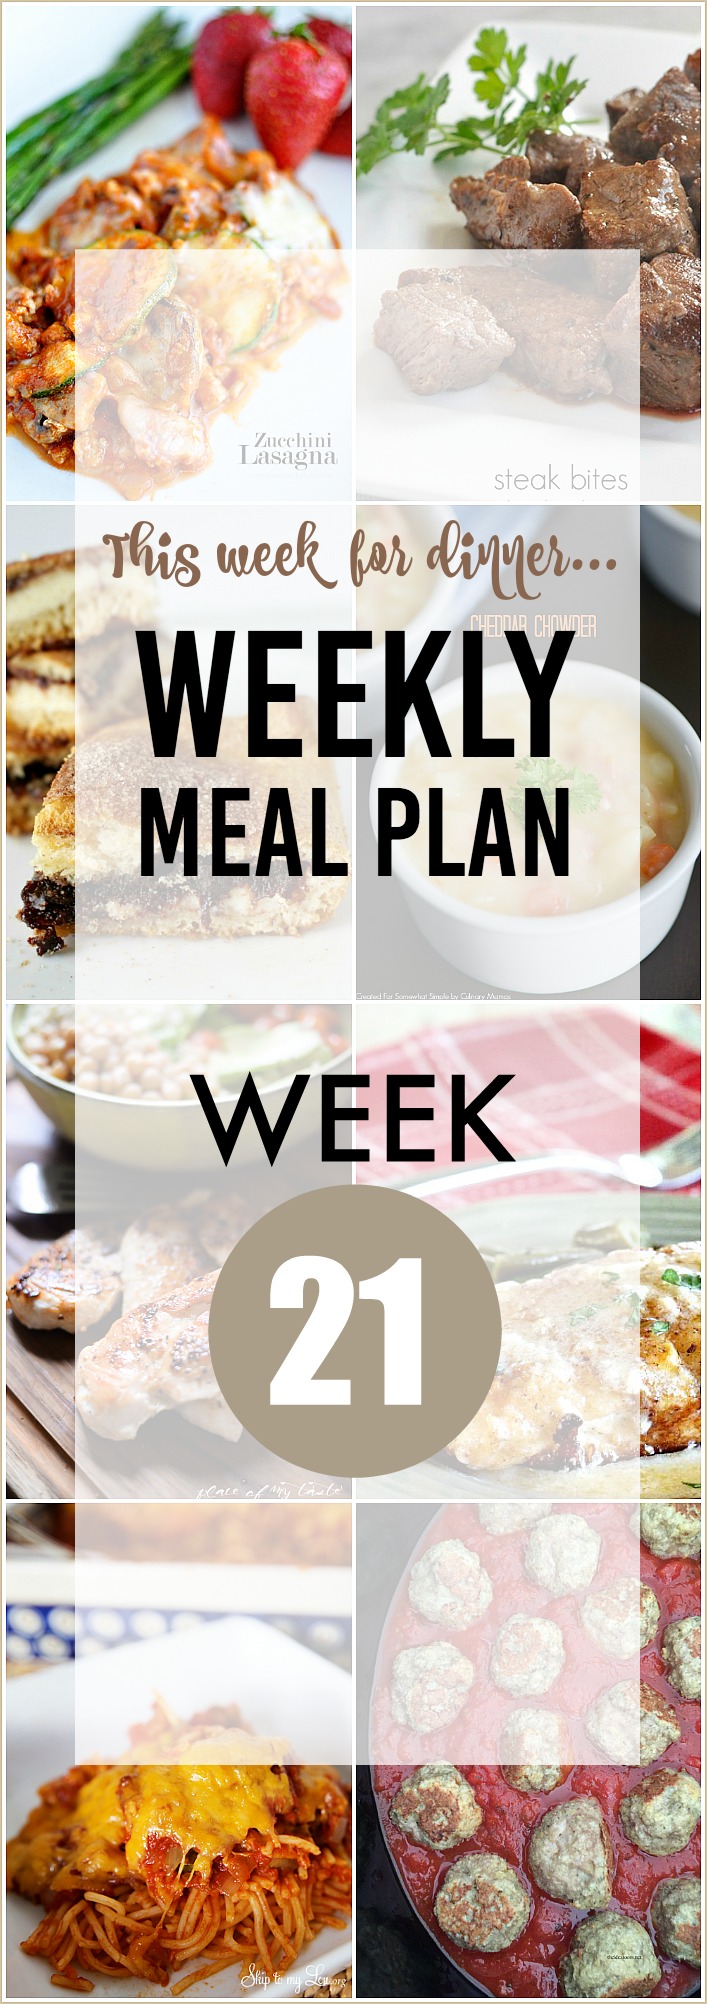 WEEKLY MEAL PLAN - Delicious recipes for the entire week!